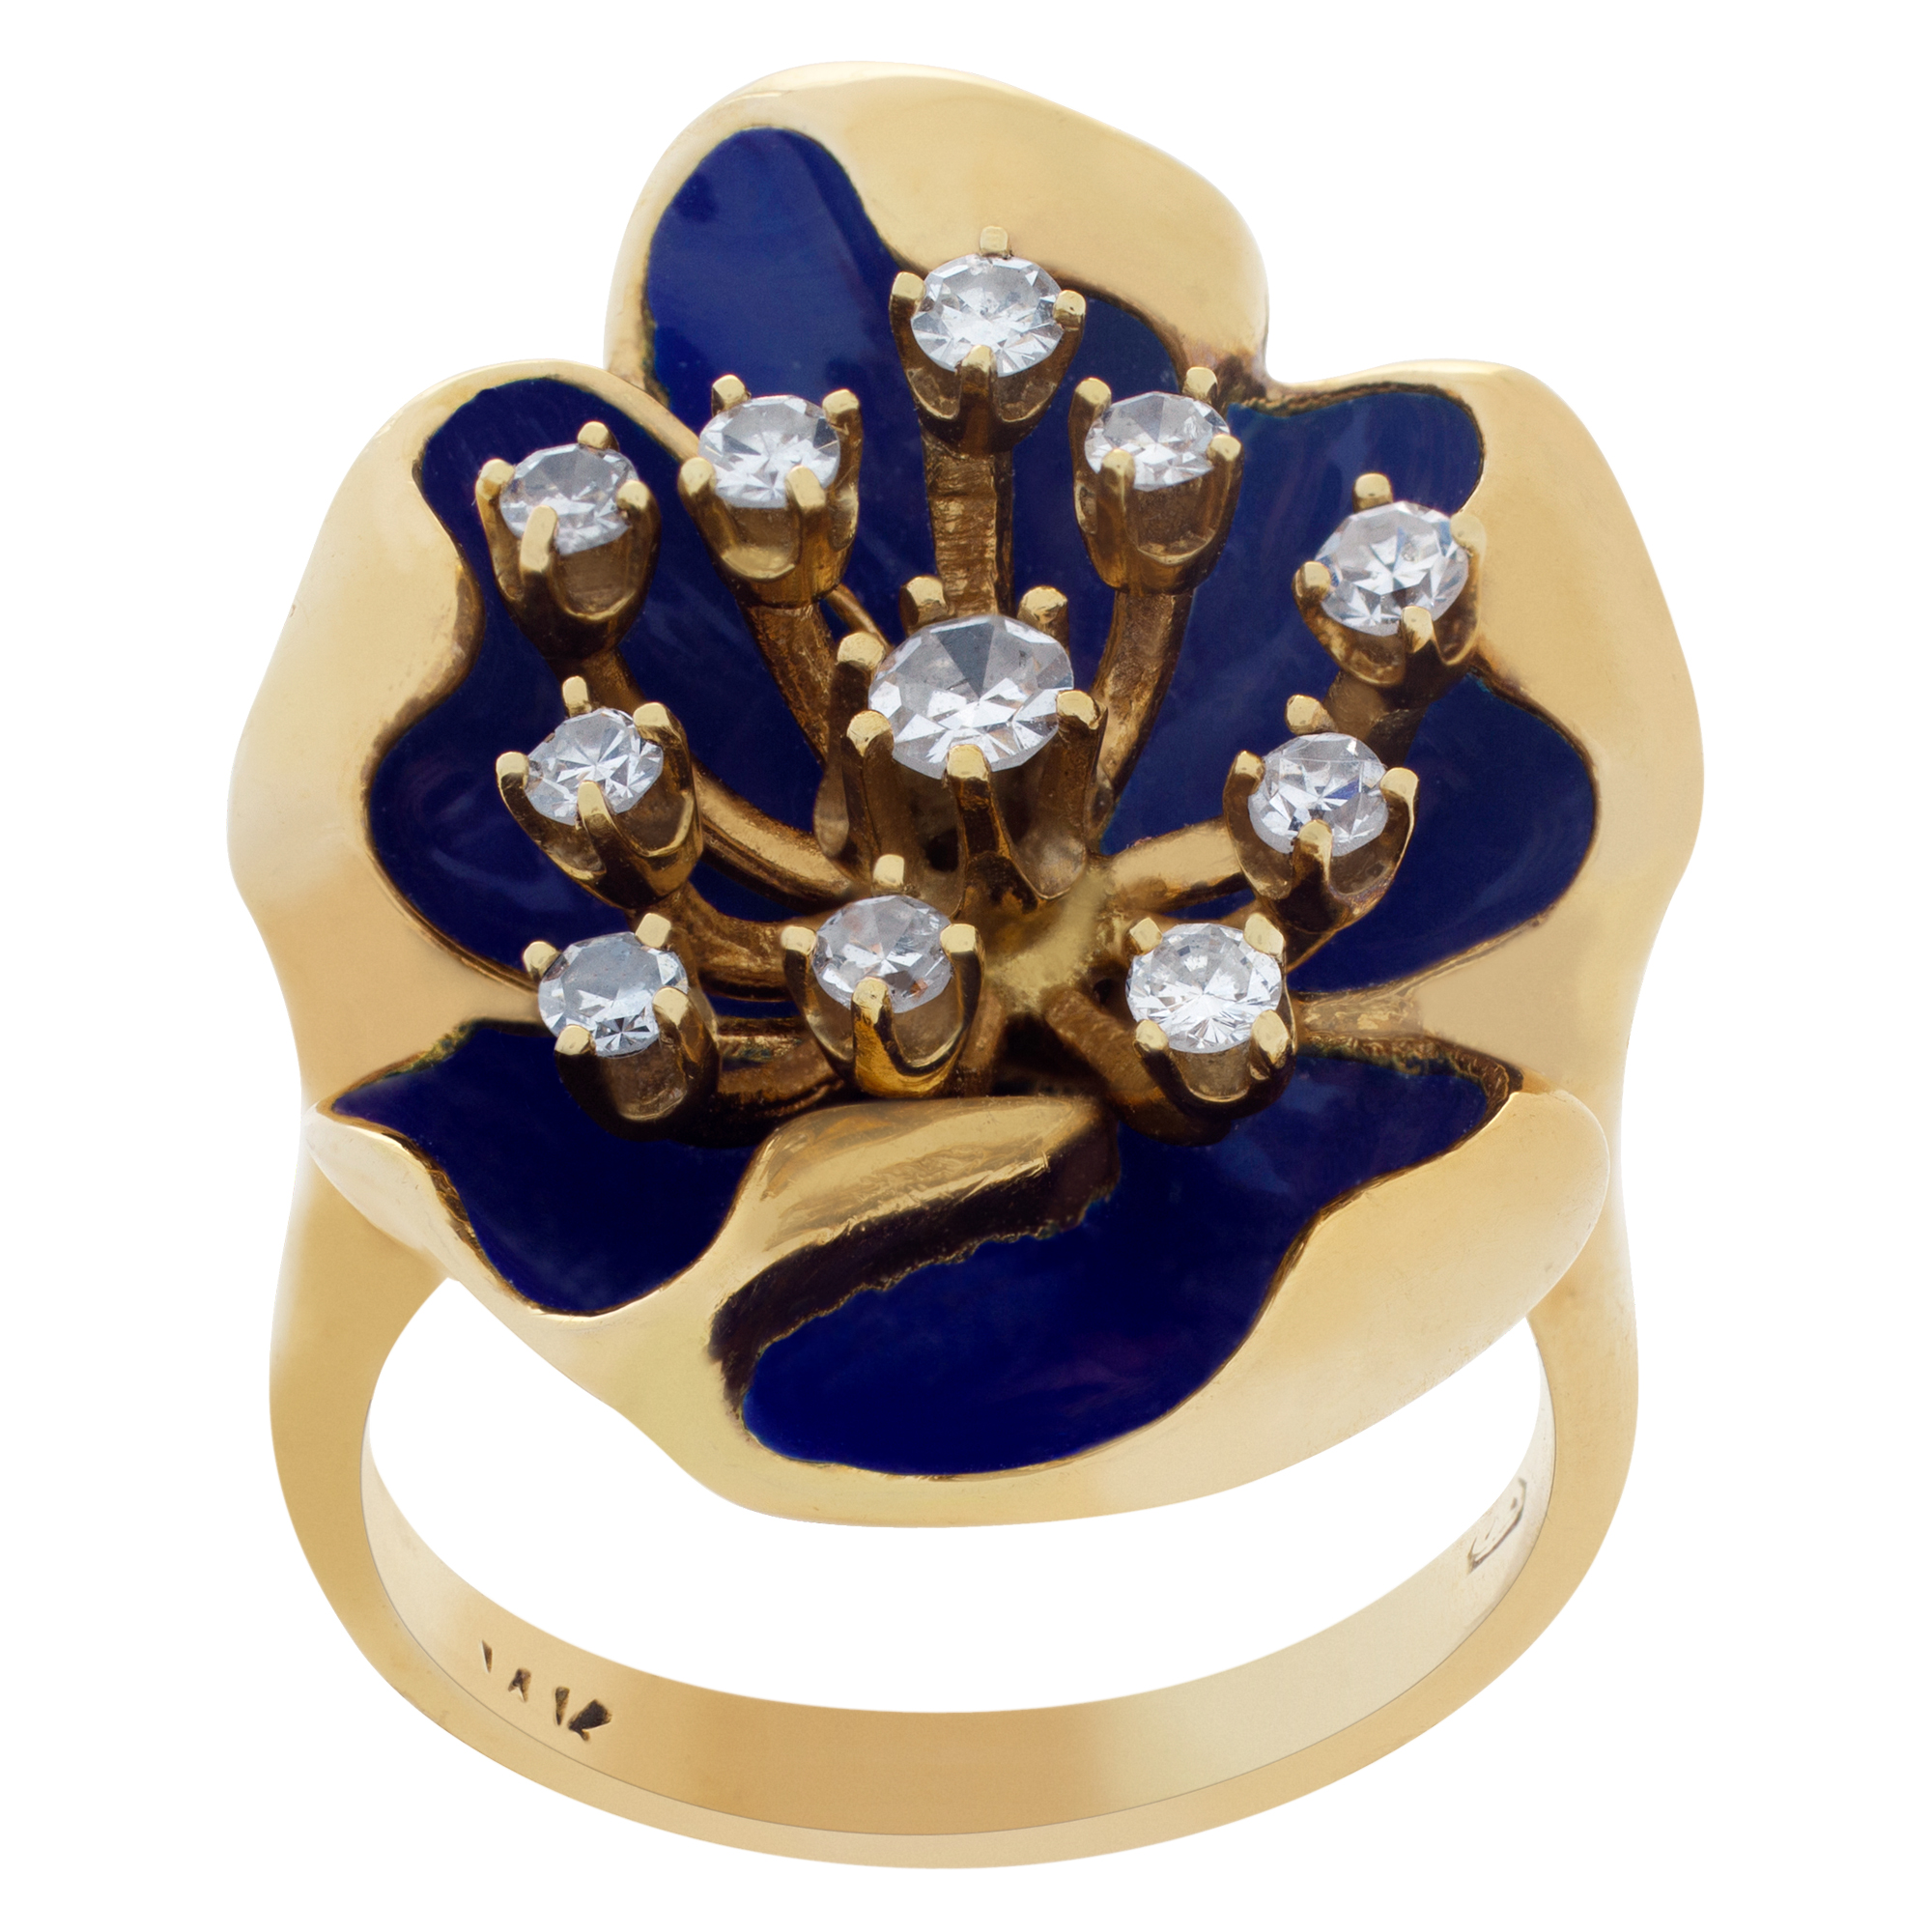 Flower Shape Enamel And Diamond Ring In 14k yellow gold. Size 5.75 image 1